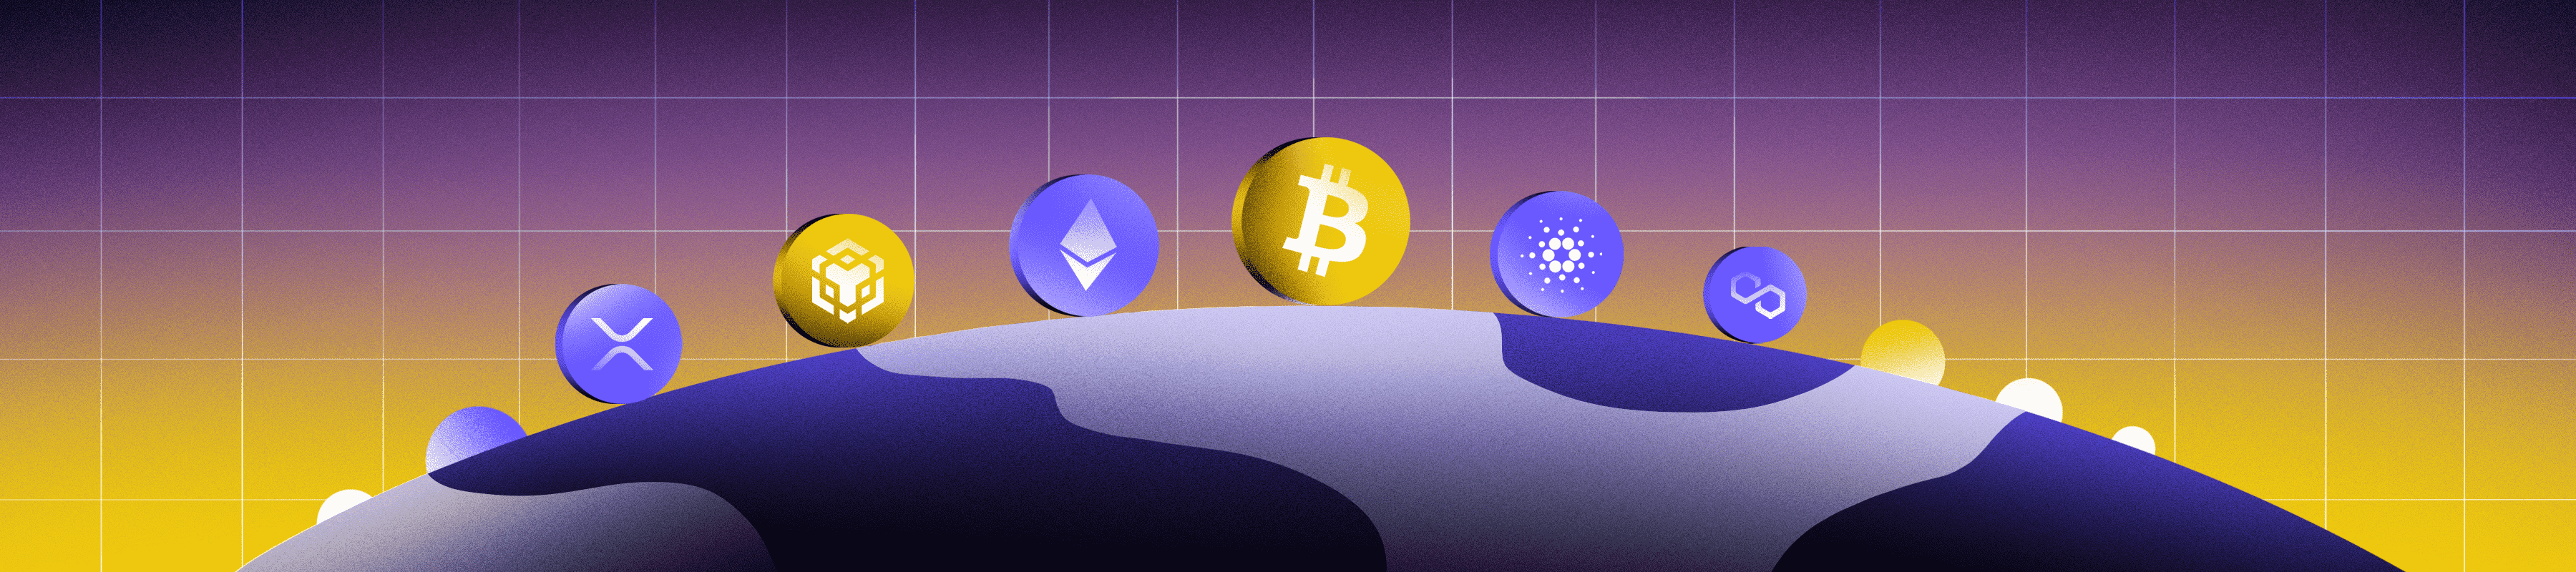 What is tokenomics in cryptocurrency?